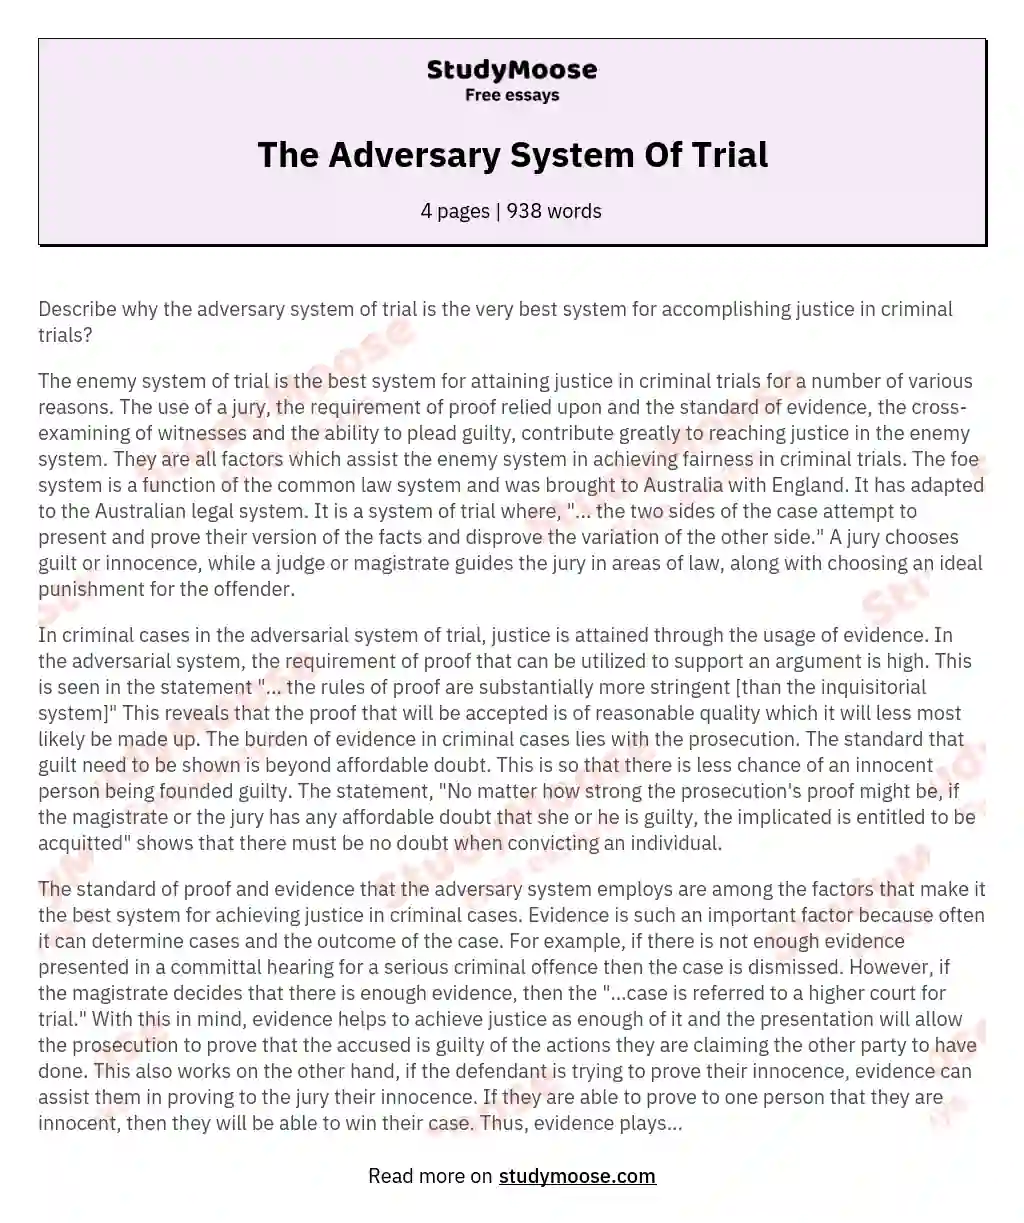 The Adversary System Of Trial essay